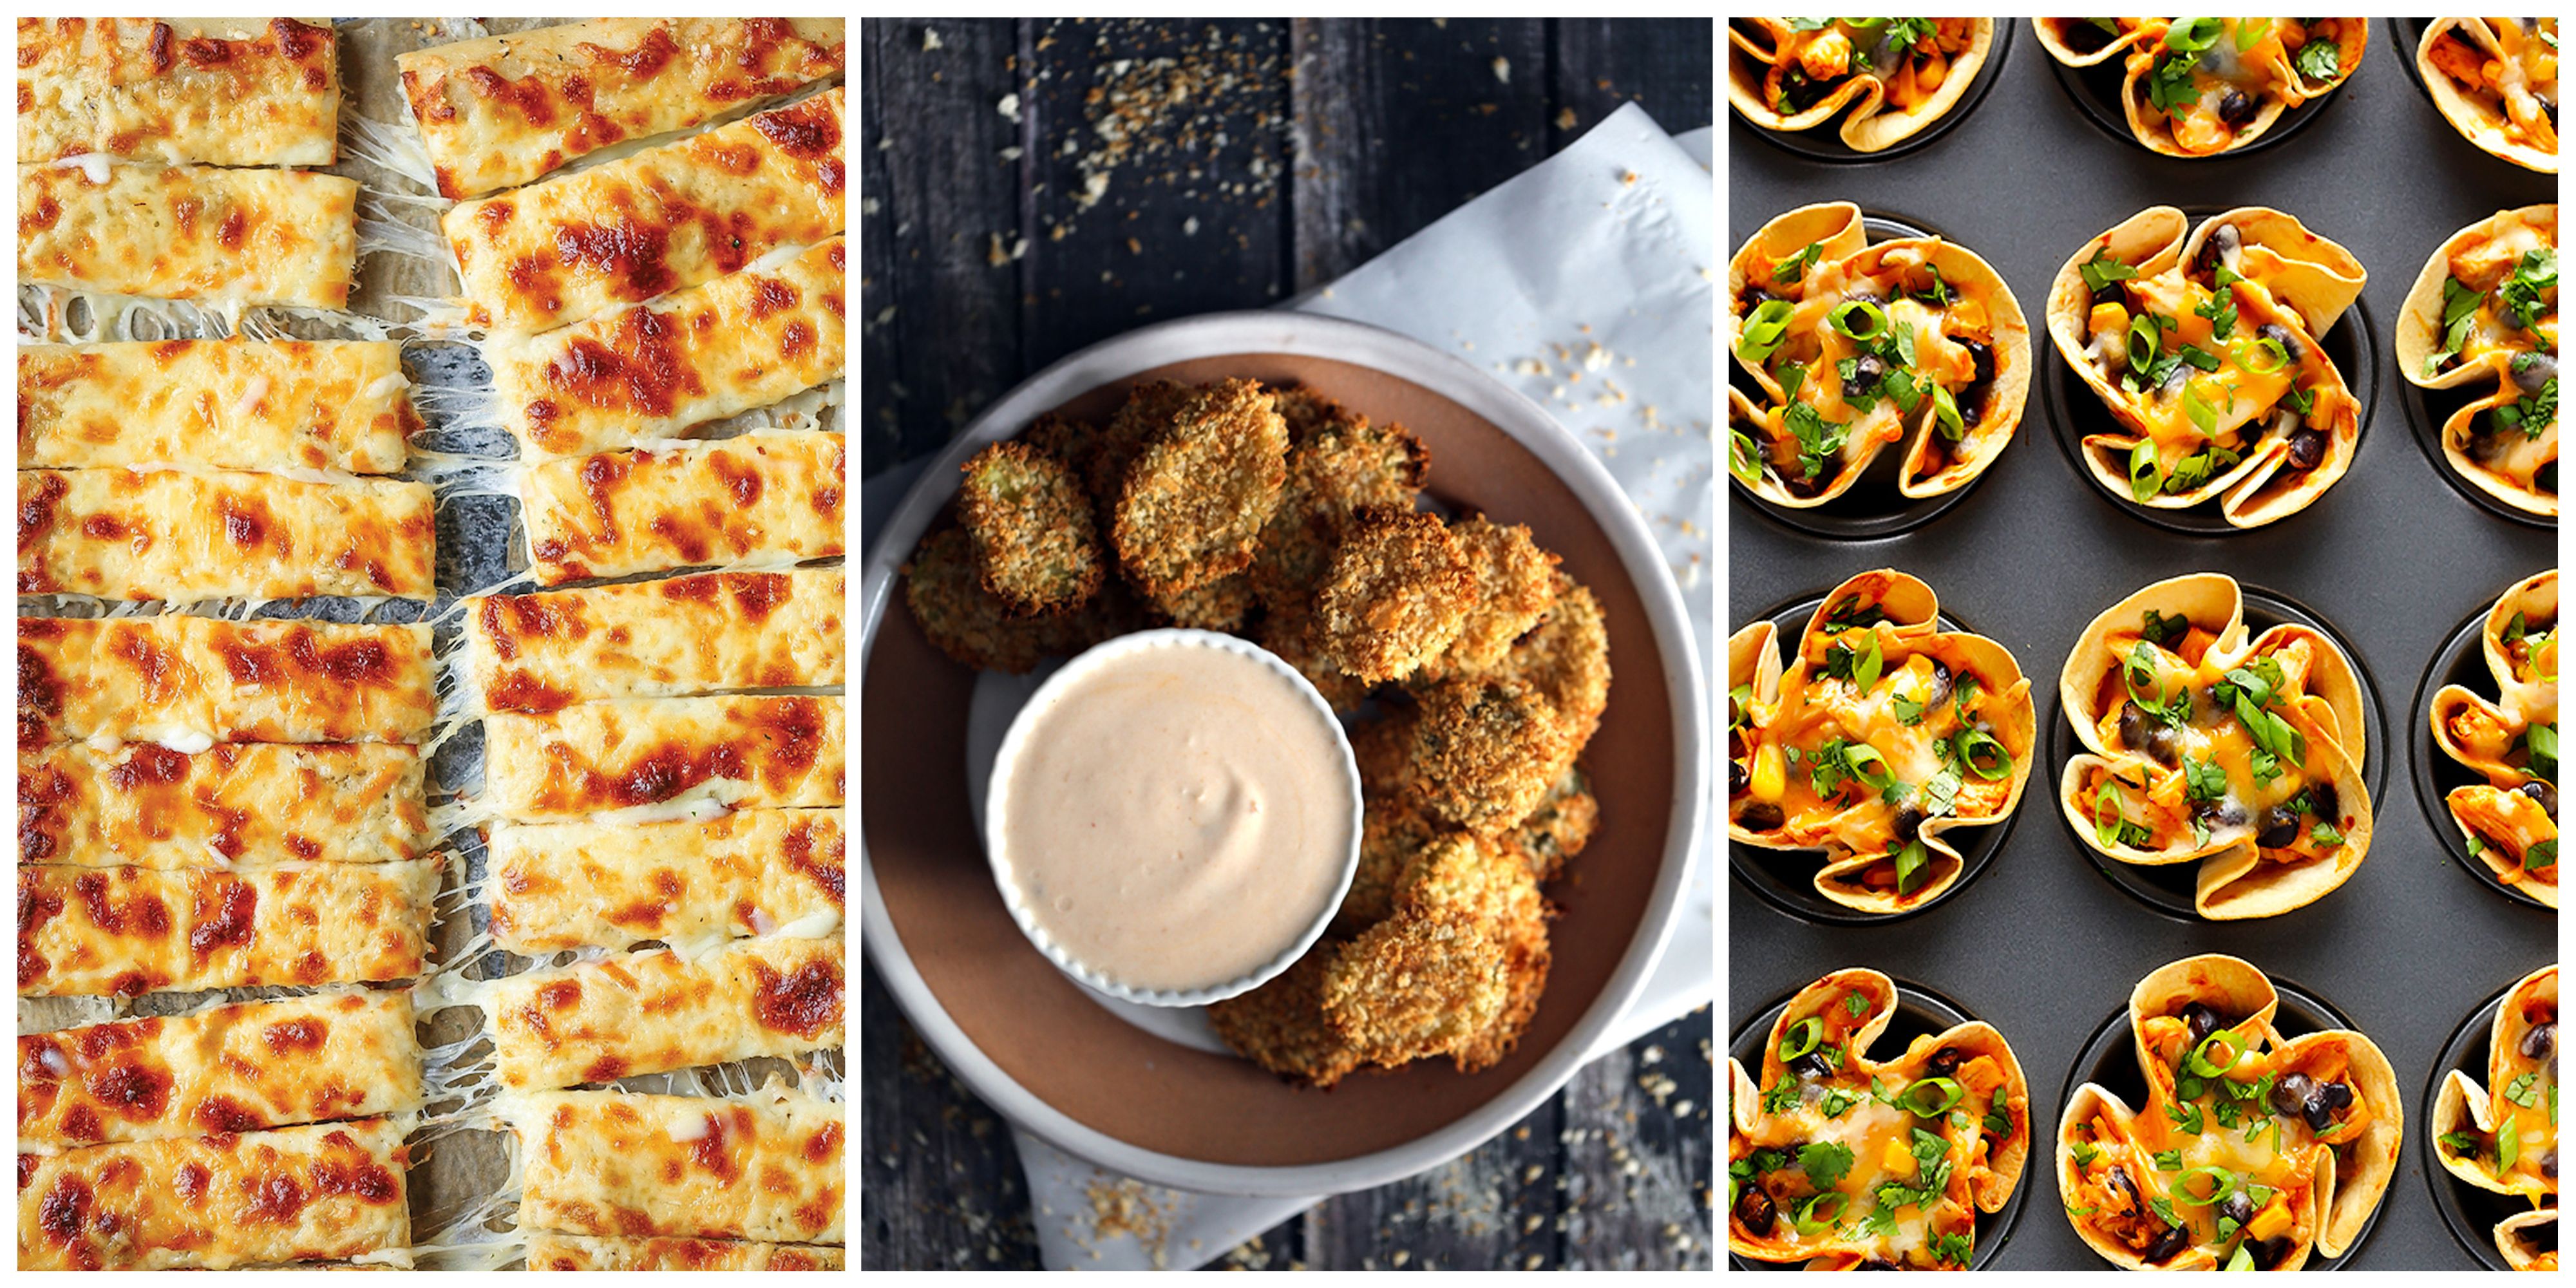 35 party food recipes - best party foods